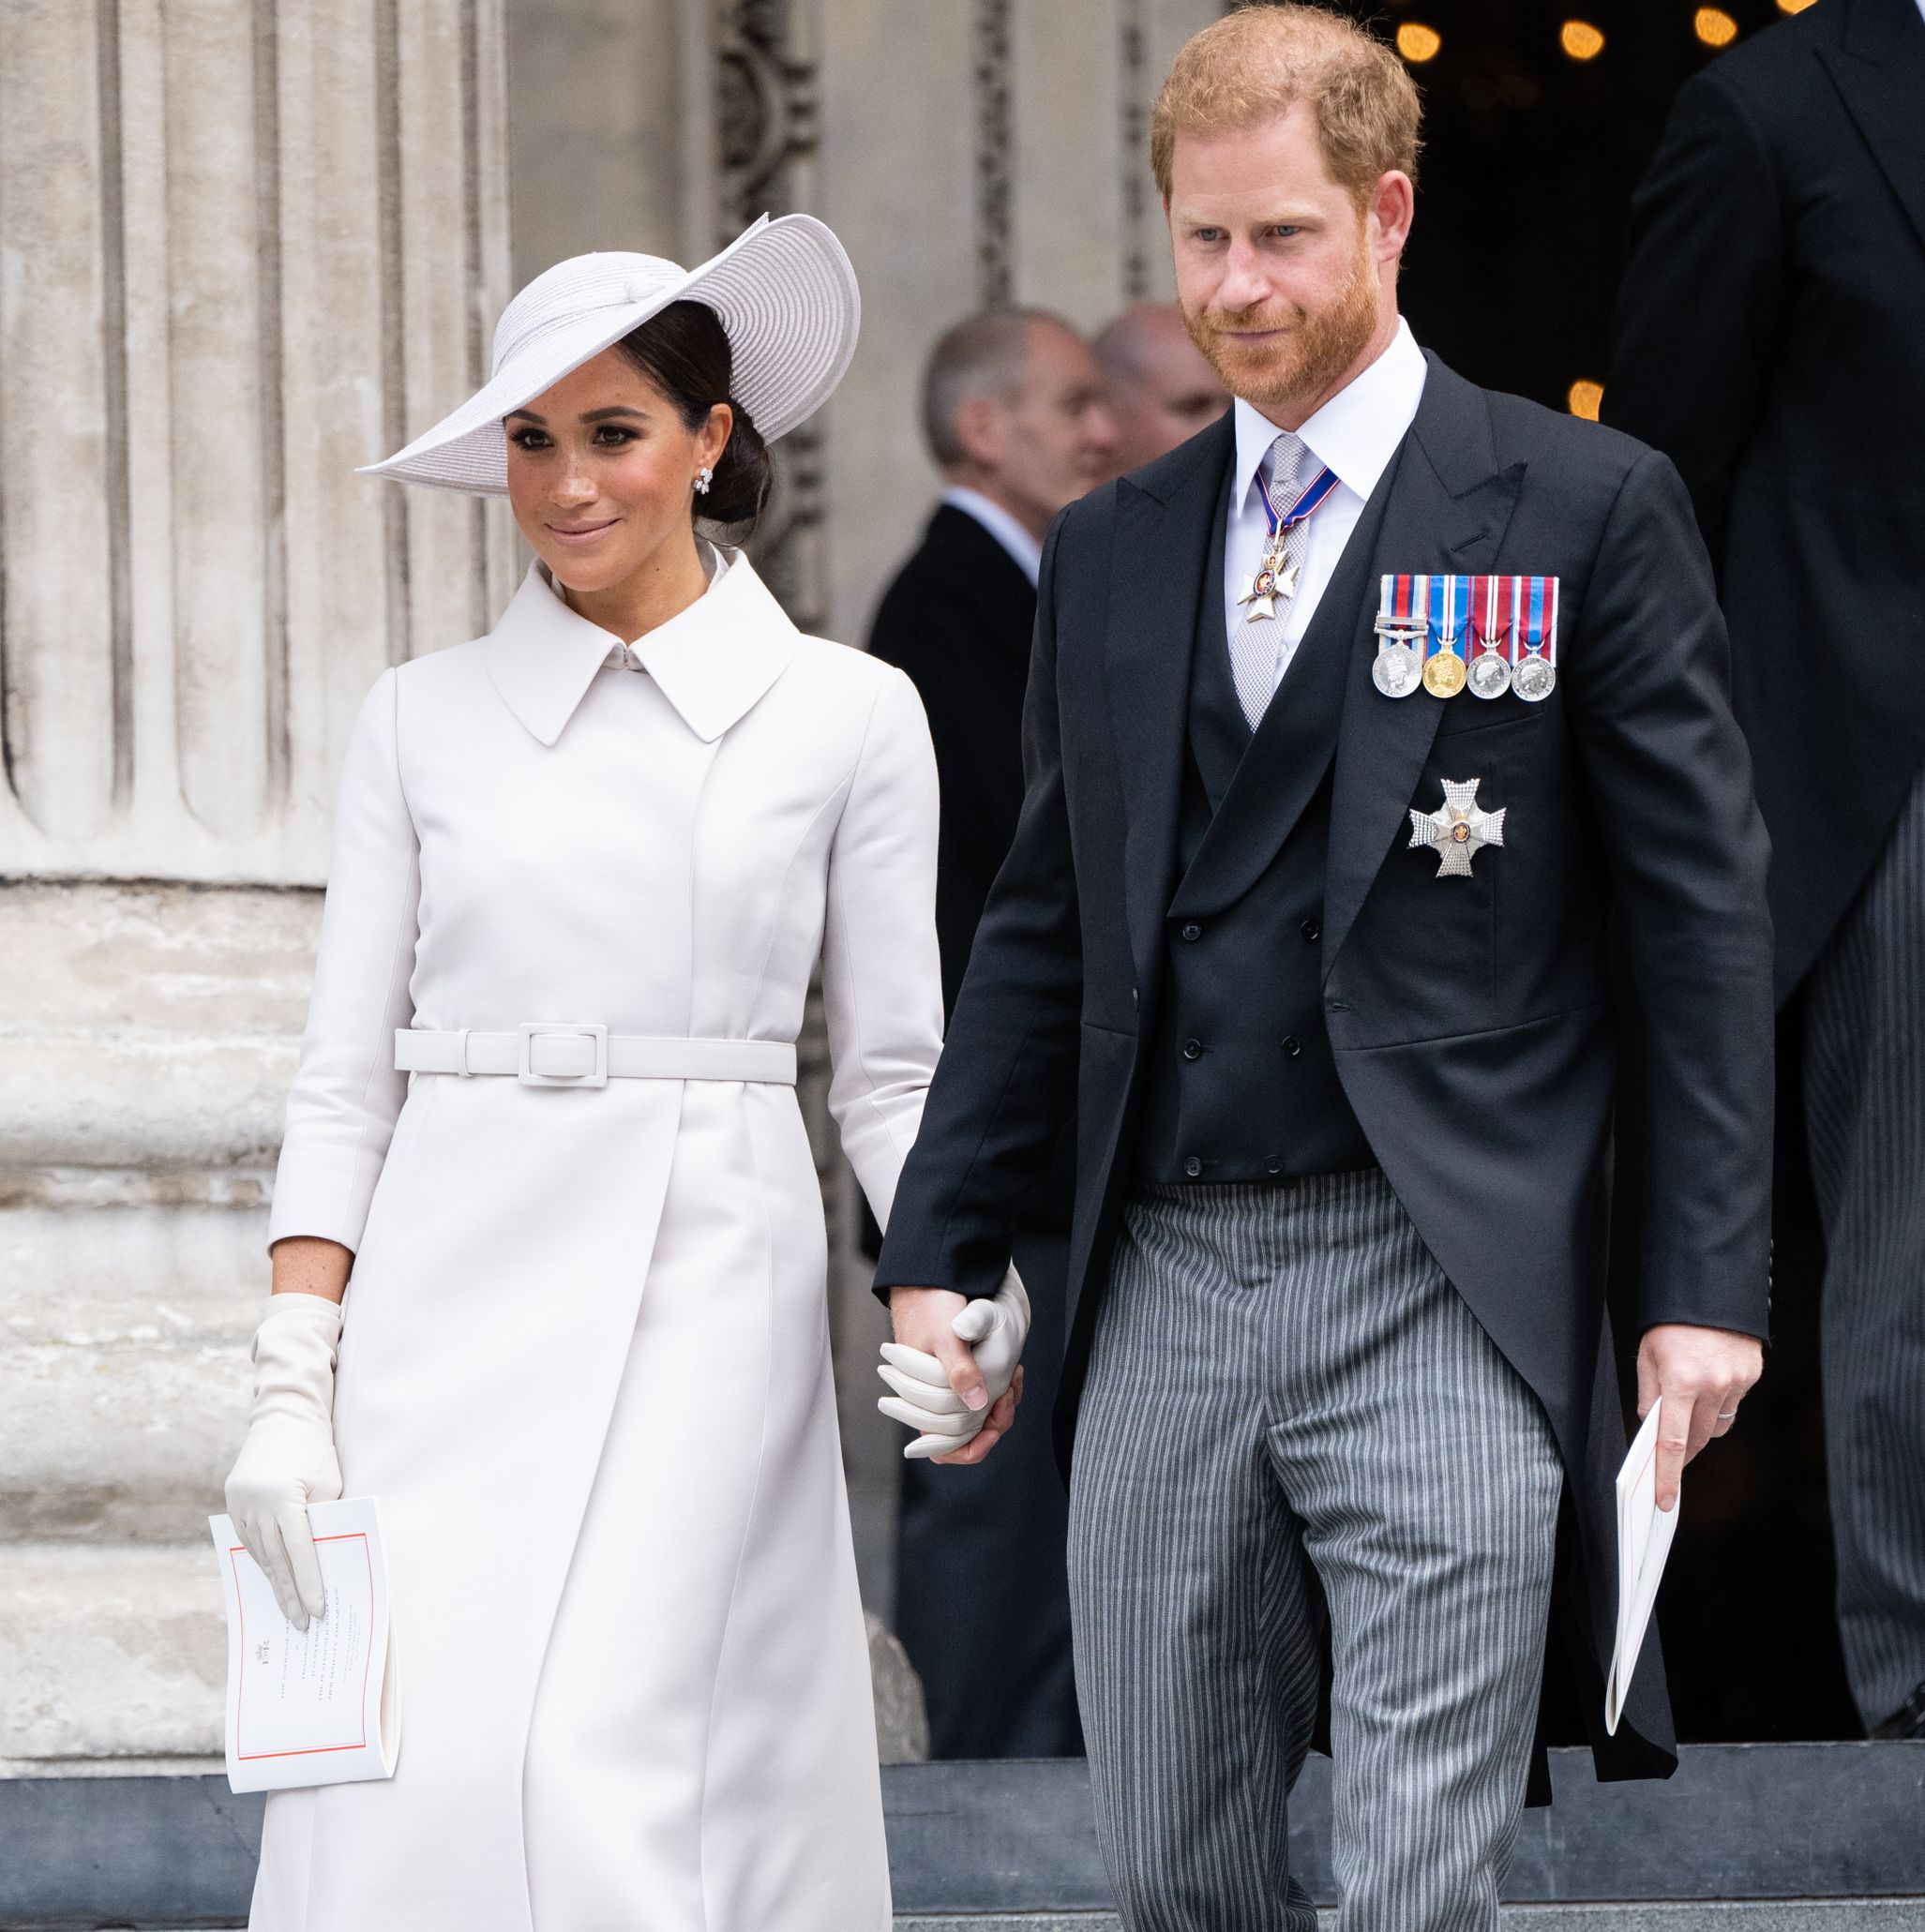 Meghan Markle and Prince Harry Could Be 